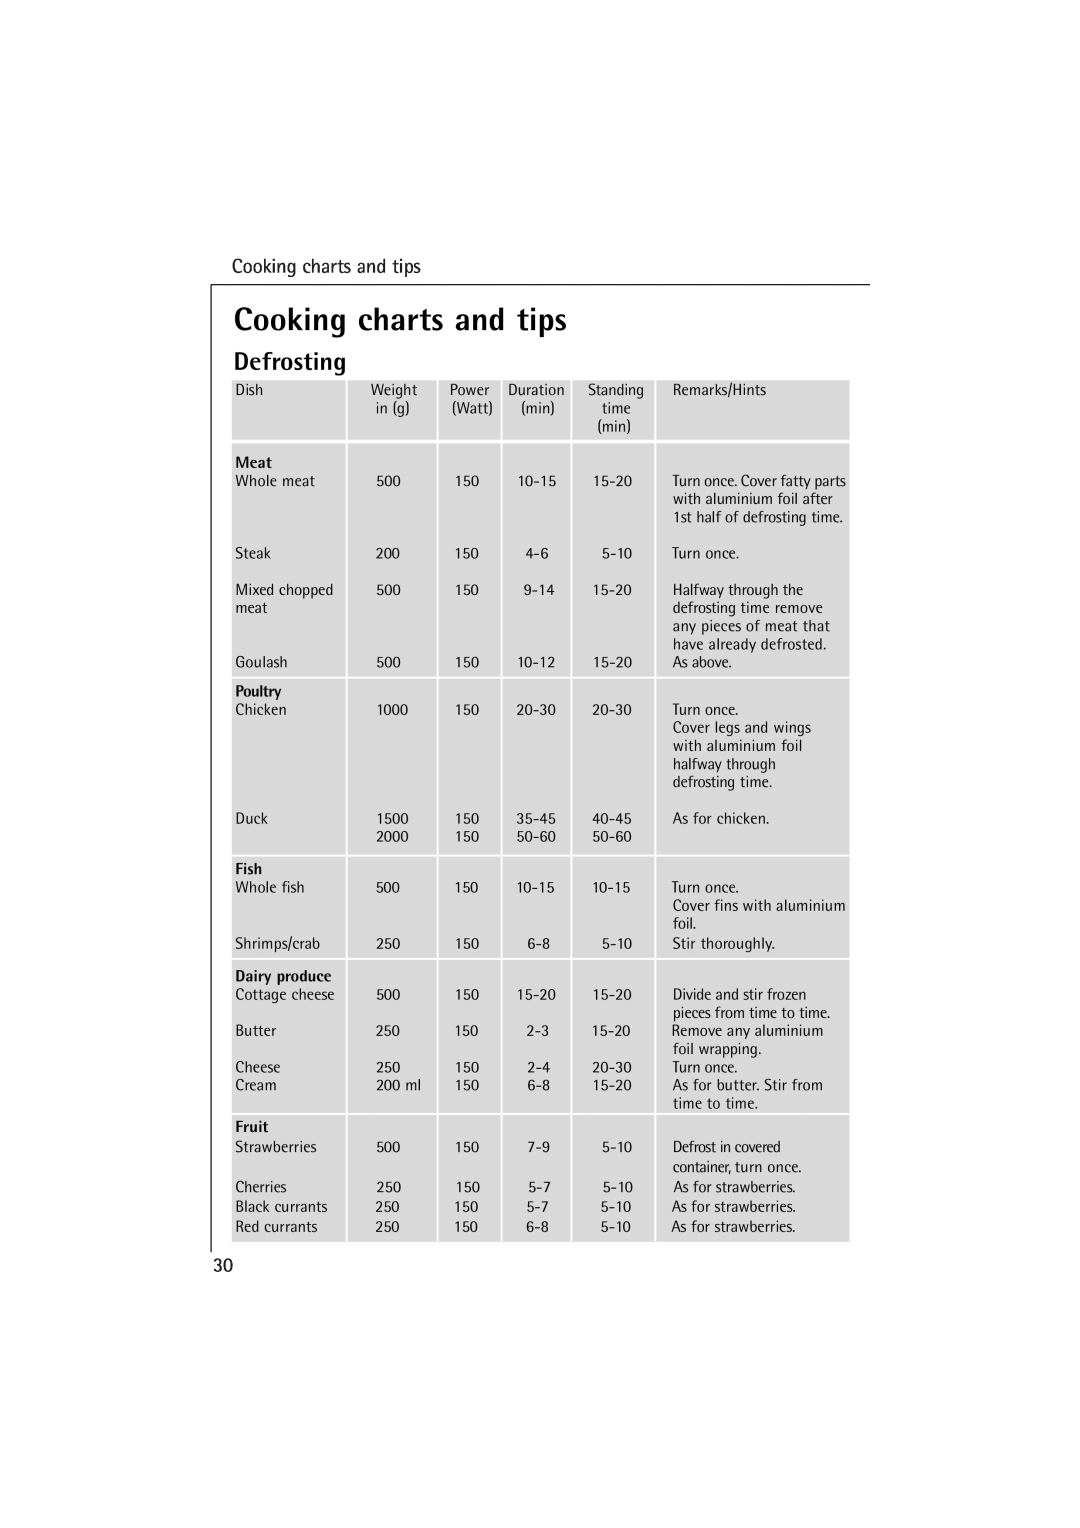 AEG MCC 663 instruction manual Cooking charts and tips, Defrosting, Meat, Poultry, Fish, Dairy produce, Fruit 